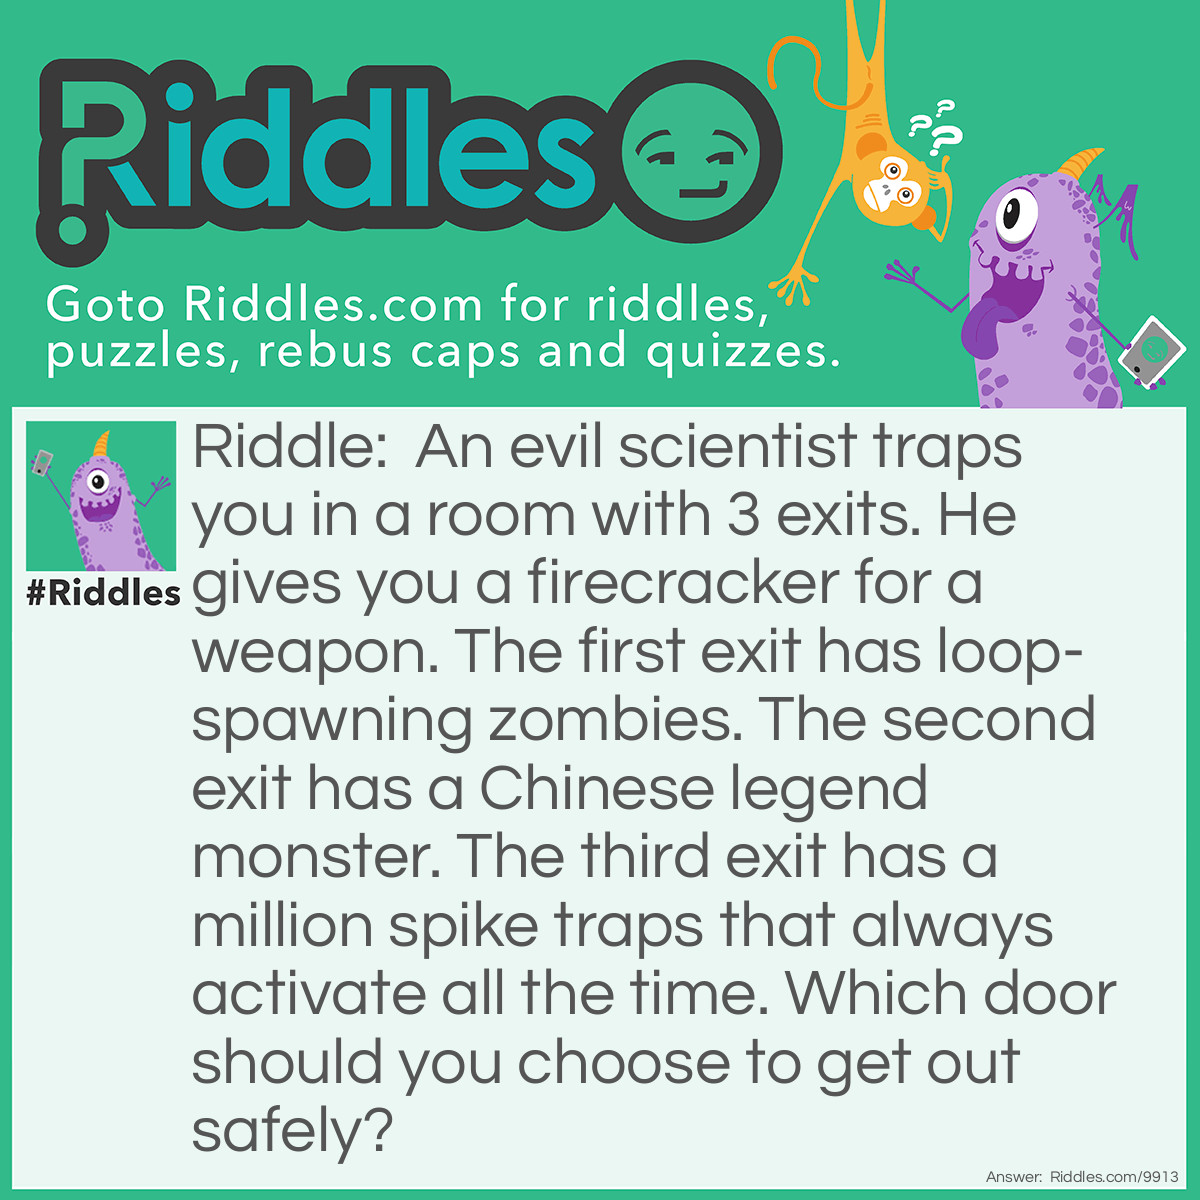 Riddle: An evil scientist traps you in a room with 3 exits. He gives you a firecracker for a weapon. The first exit has loop-spawning zombies. The second exit has a Chinese legend monster. The third exit has a million spike traps that always activate all the time. Which door should you choose to get out safely? Answer: Door/Exit 2. Reason 1: because it says the monster is a legend so it doesn't exist. Reason 2: even if it exists, it's scared of firecrackers so just throw the firecracker into the room before going so the monster stays out of your way.